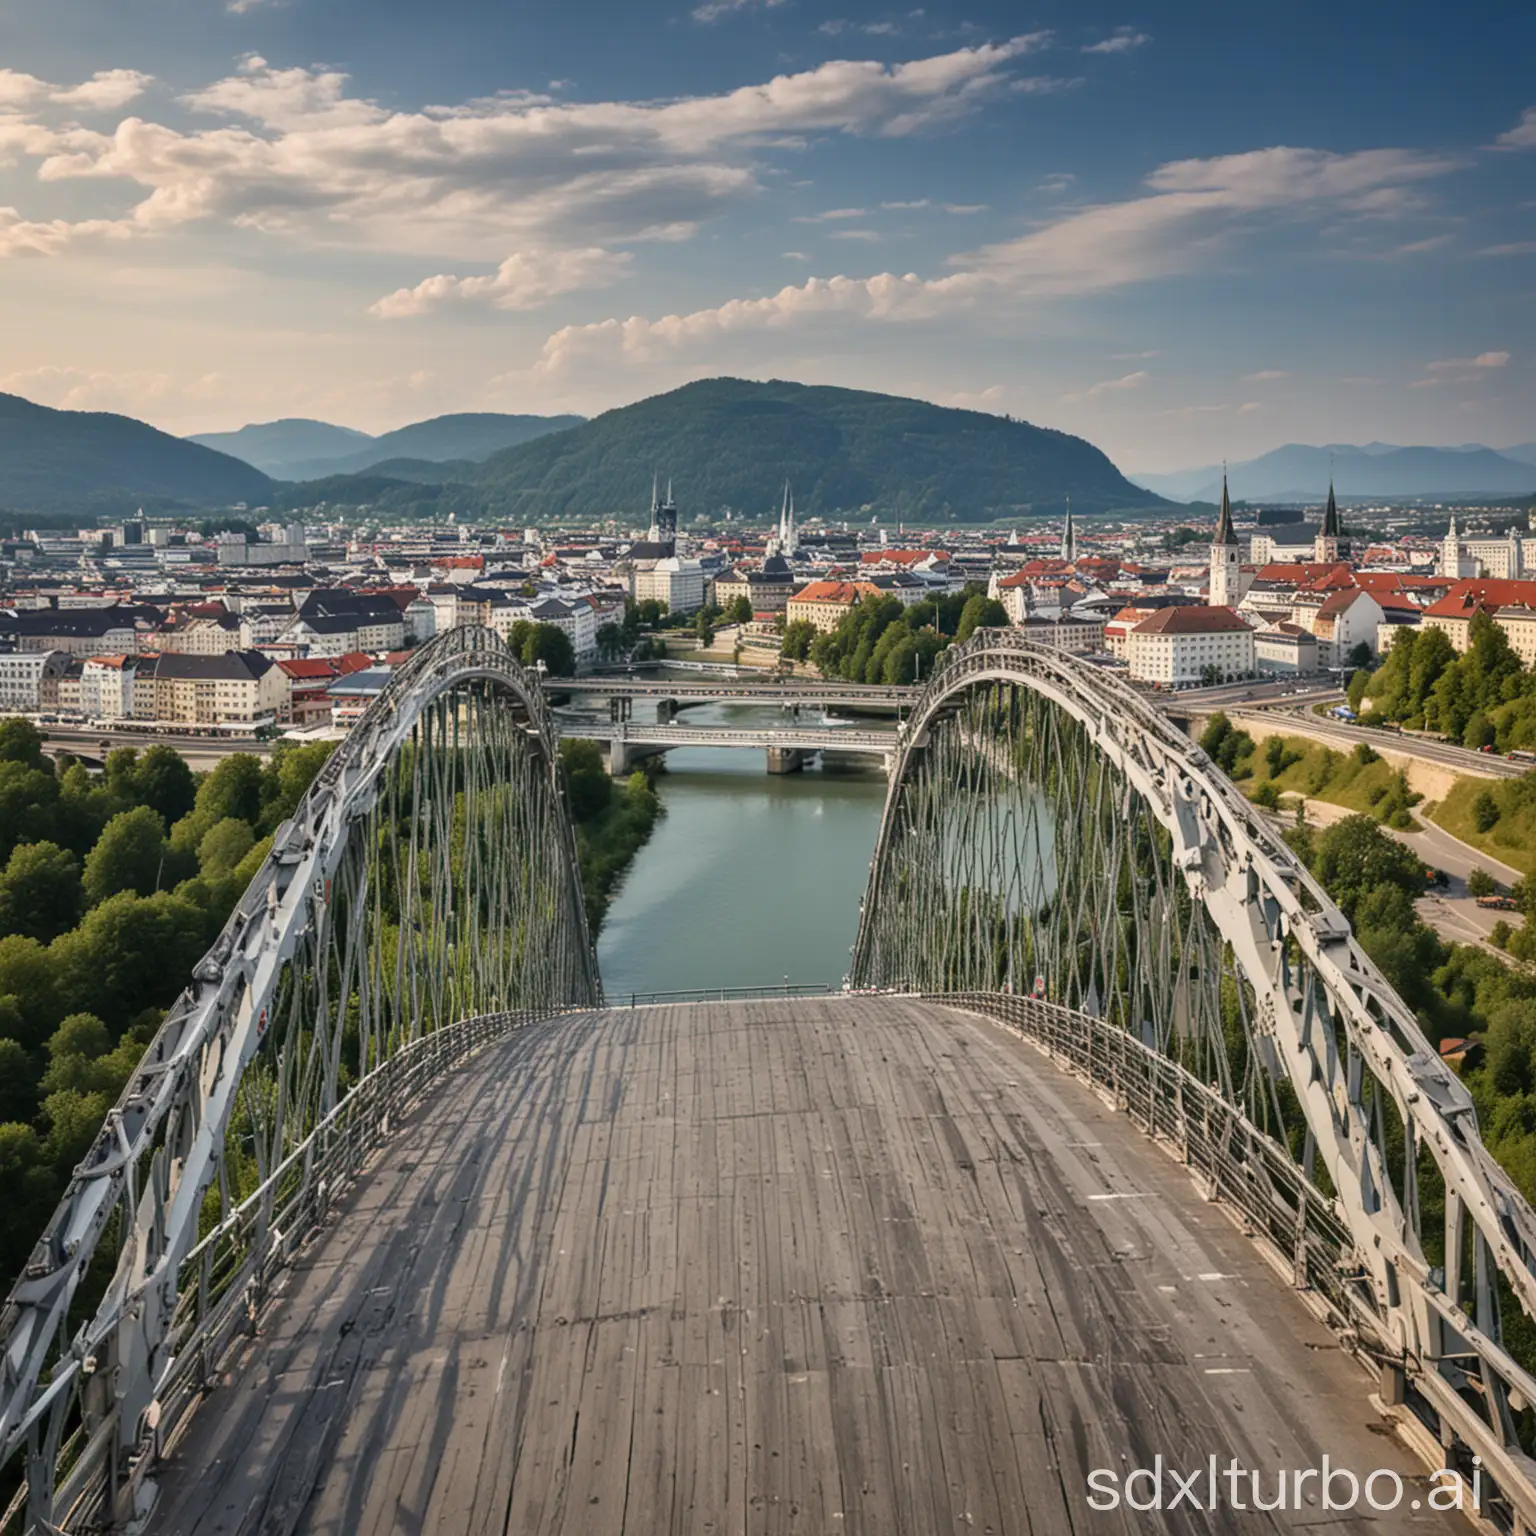 City Linz Austria nibelungenbrücke in Upper Austria with mountains and lake in the background